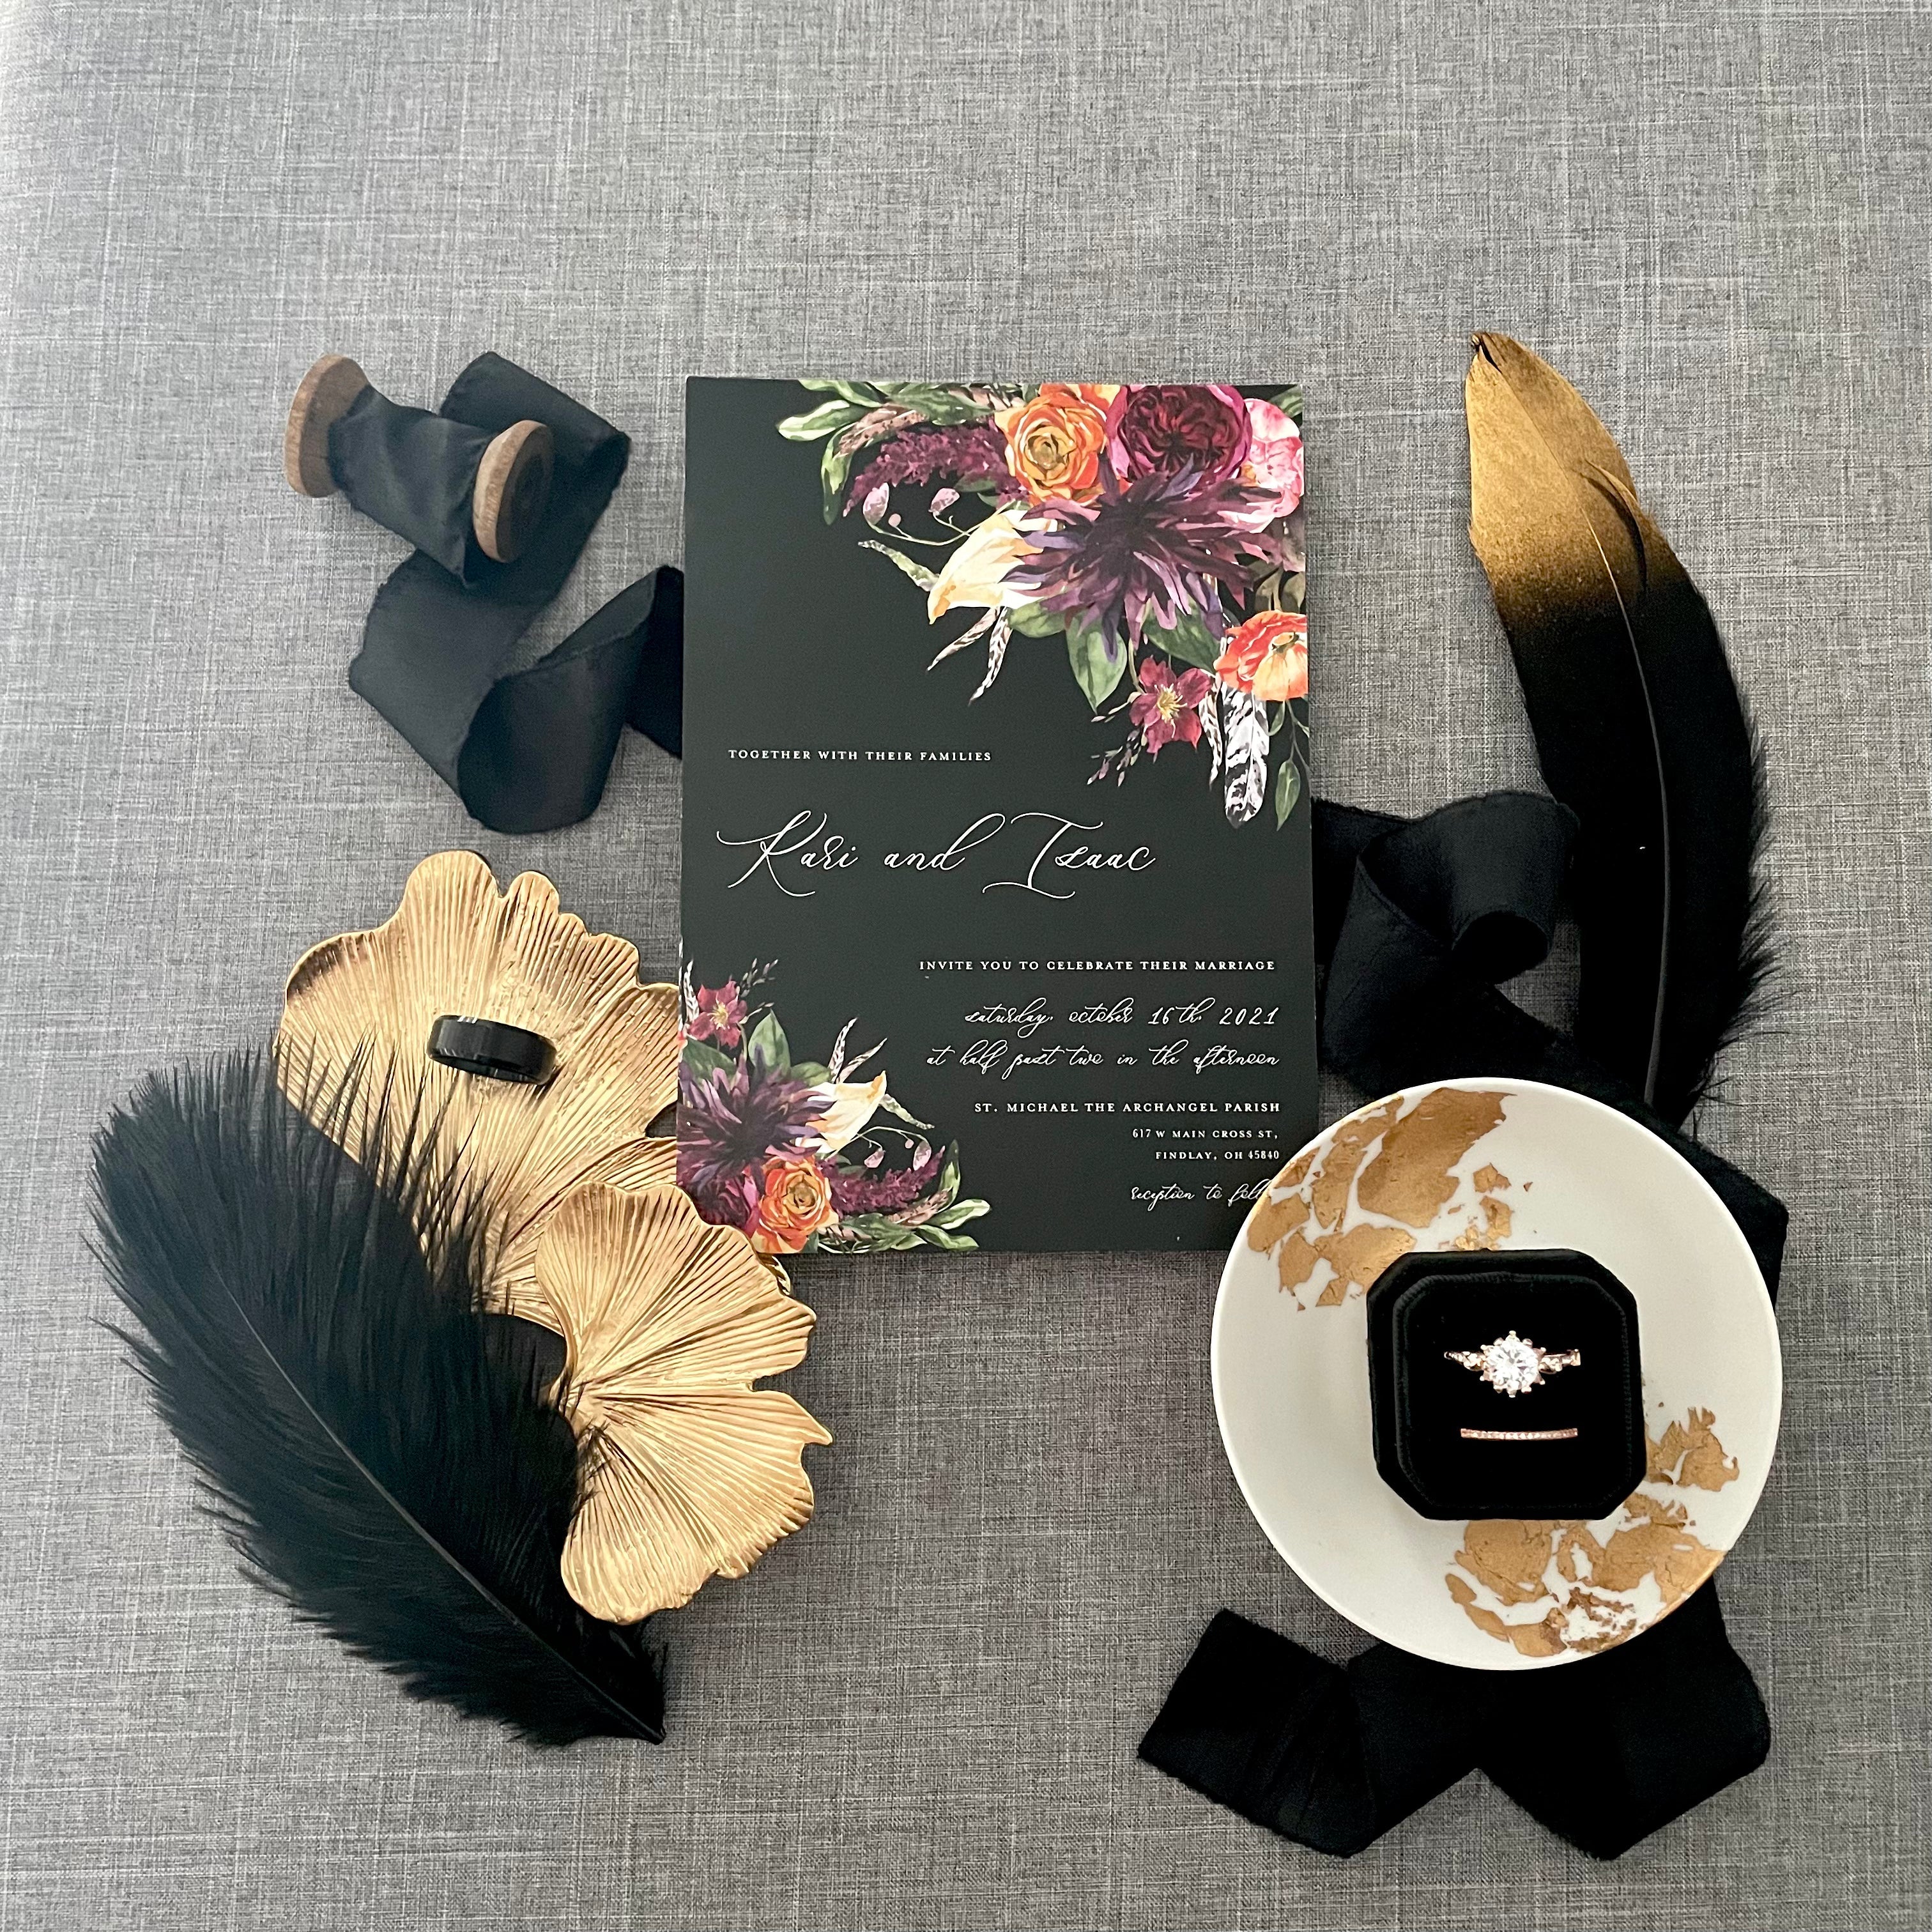 Black silk ribbon styled with the wedding invitation, black ring box in gold and white dish, black feathers and gold leaf dish -  Wedding Flat lay props from Champagne & GRIT